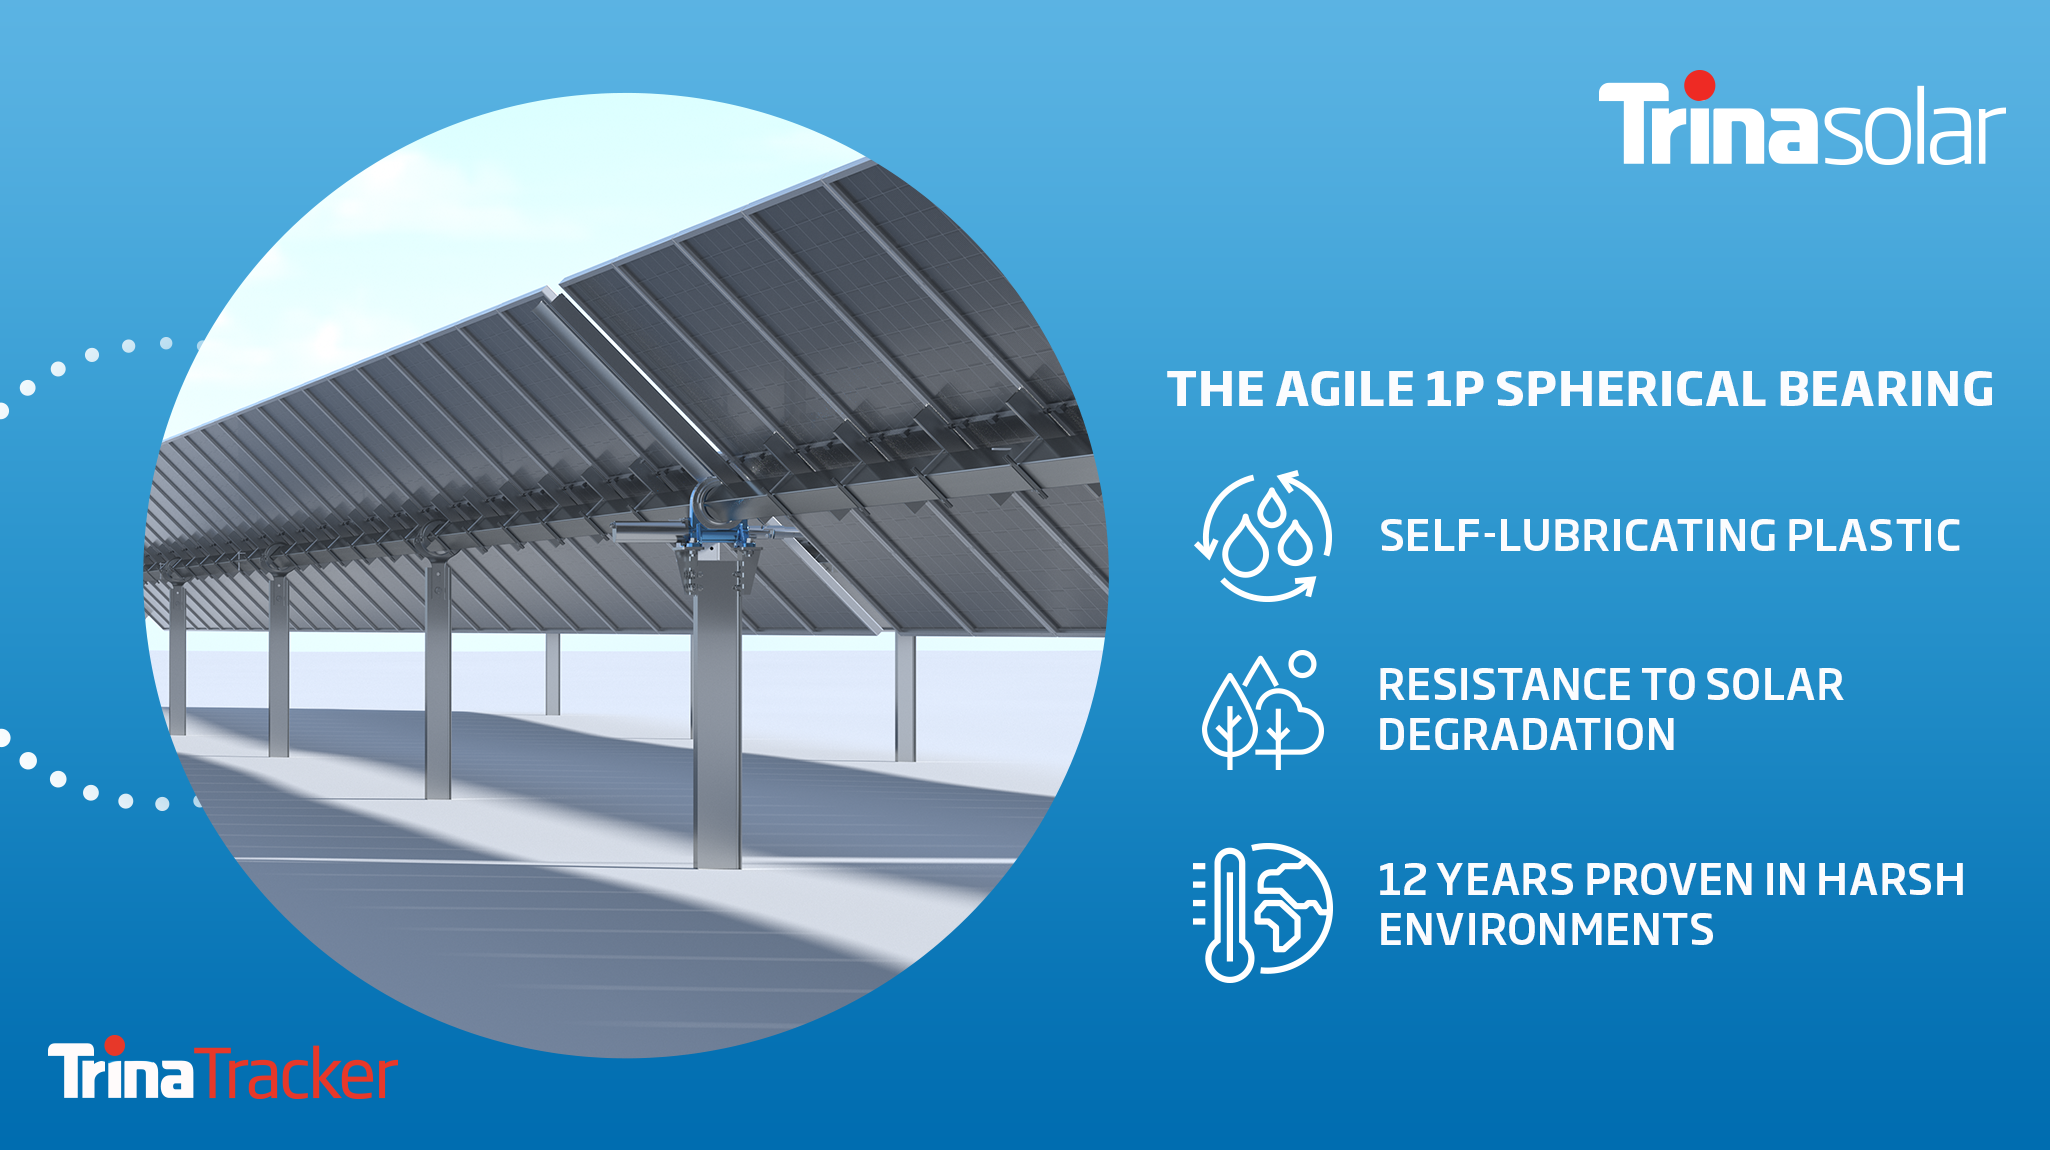 Image for Trina Solar Launches Agile 1P DualRow Tracker Globally, Driving Up Energy Gain By 8%